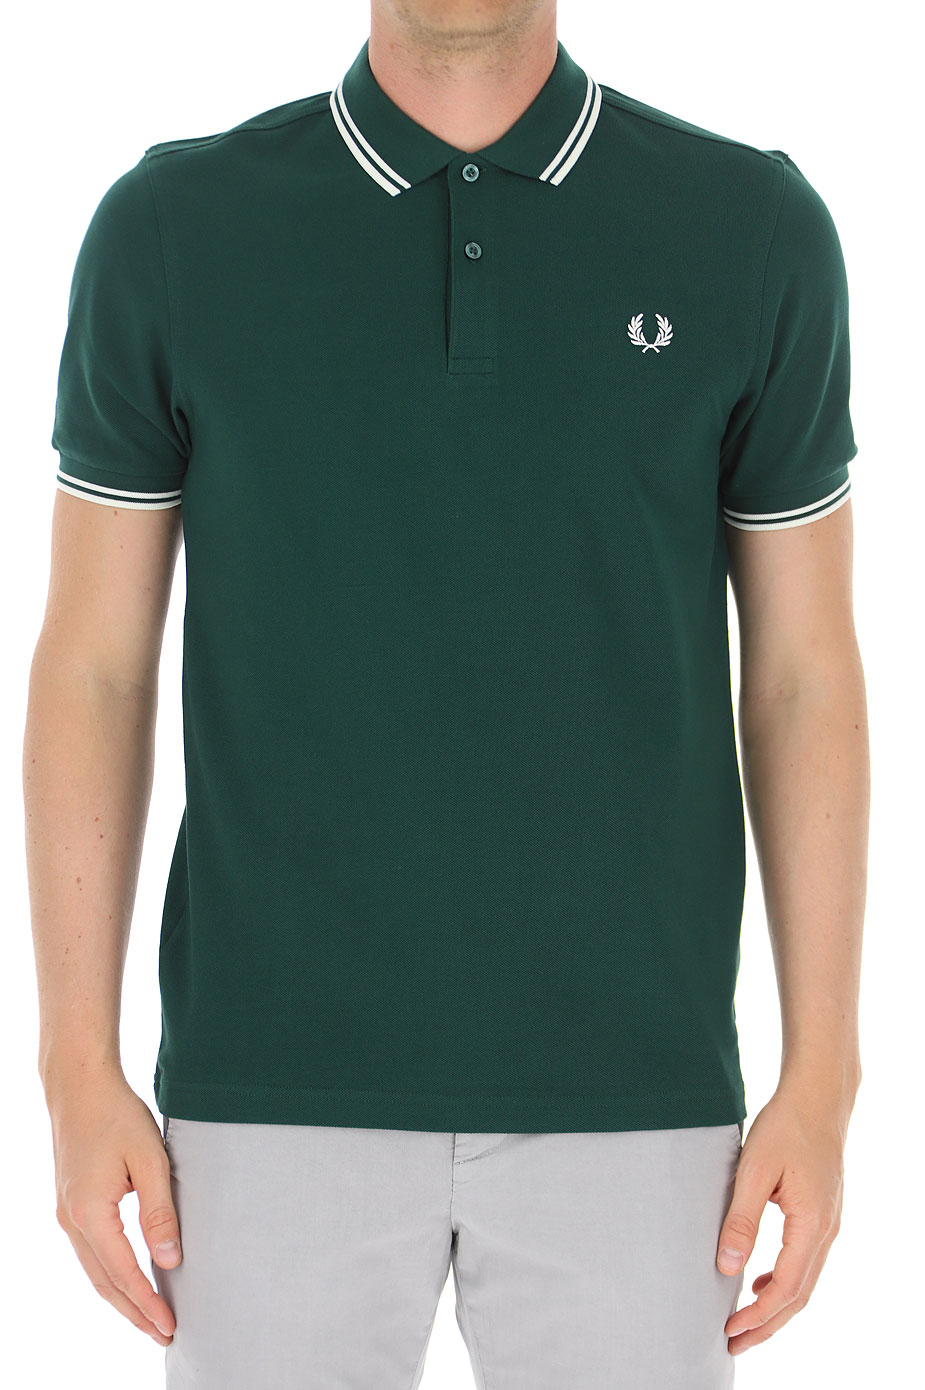 Mens Clothing Fred Perry, Style code: m3600-406-